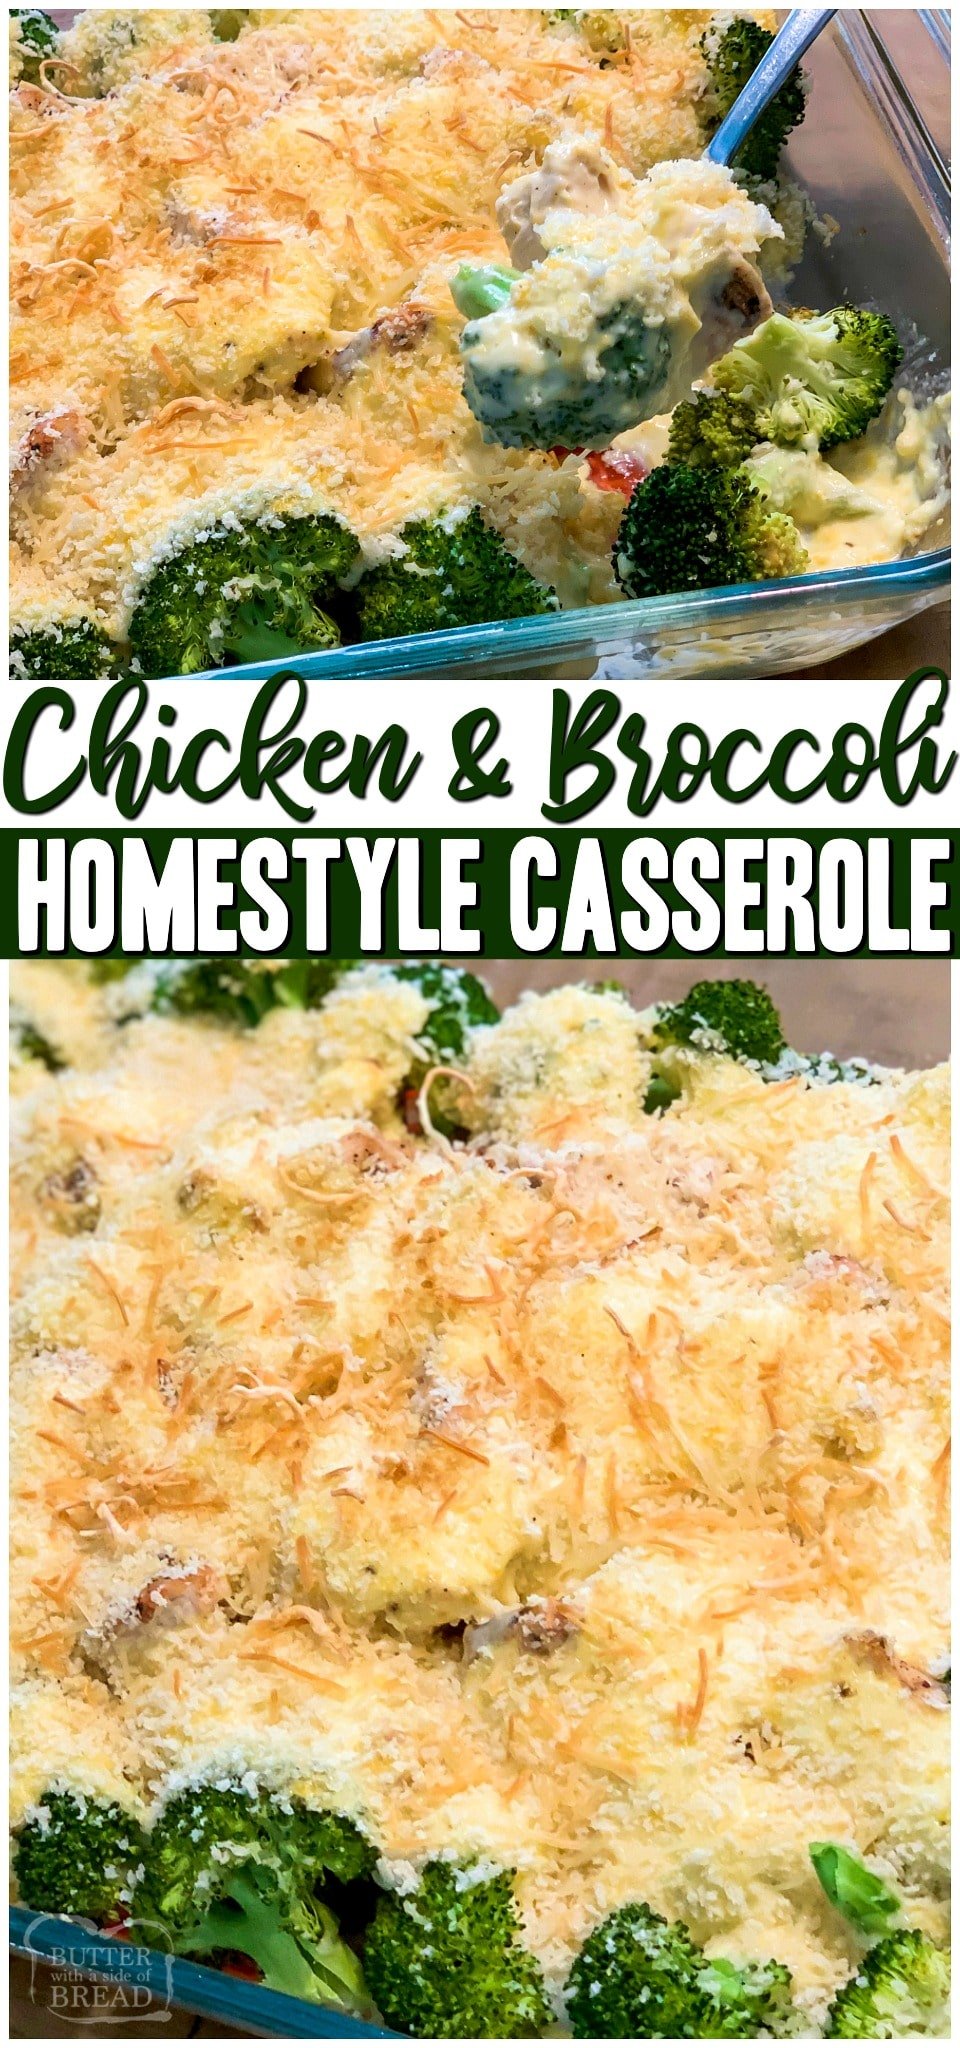 Chicken and Broccoli Casserole~ we're sharing our family recipe that's been passed down generations! Creamy cheese sauce mixed with delicious tender chicken and broccoli topped with buttery bread crumbs make it the perfect comfort food! #chicken #broccoli #casserole #easyrecipe #dinner #chickendinner from BUTTER WITH A SIDE OF BREAD